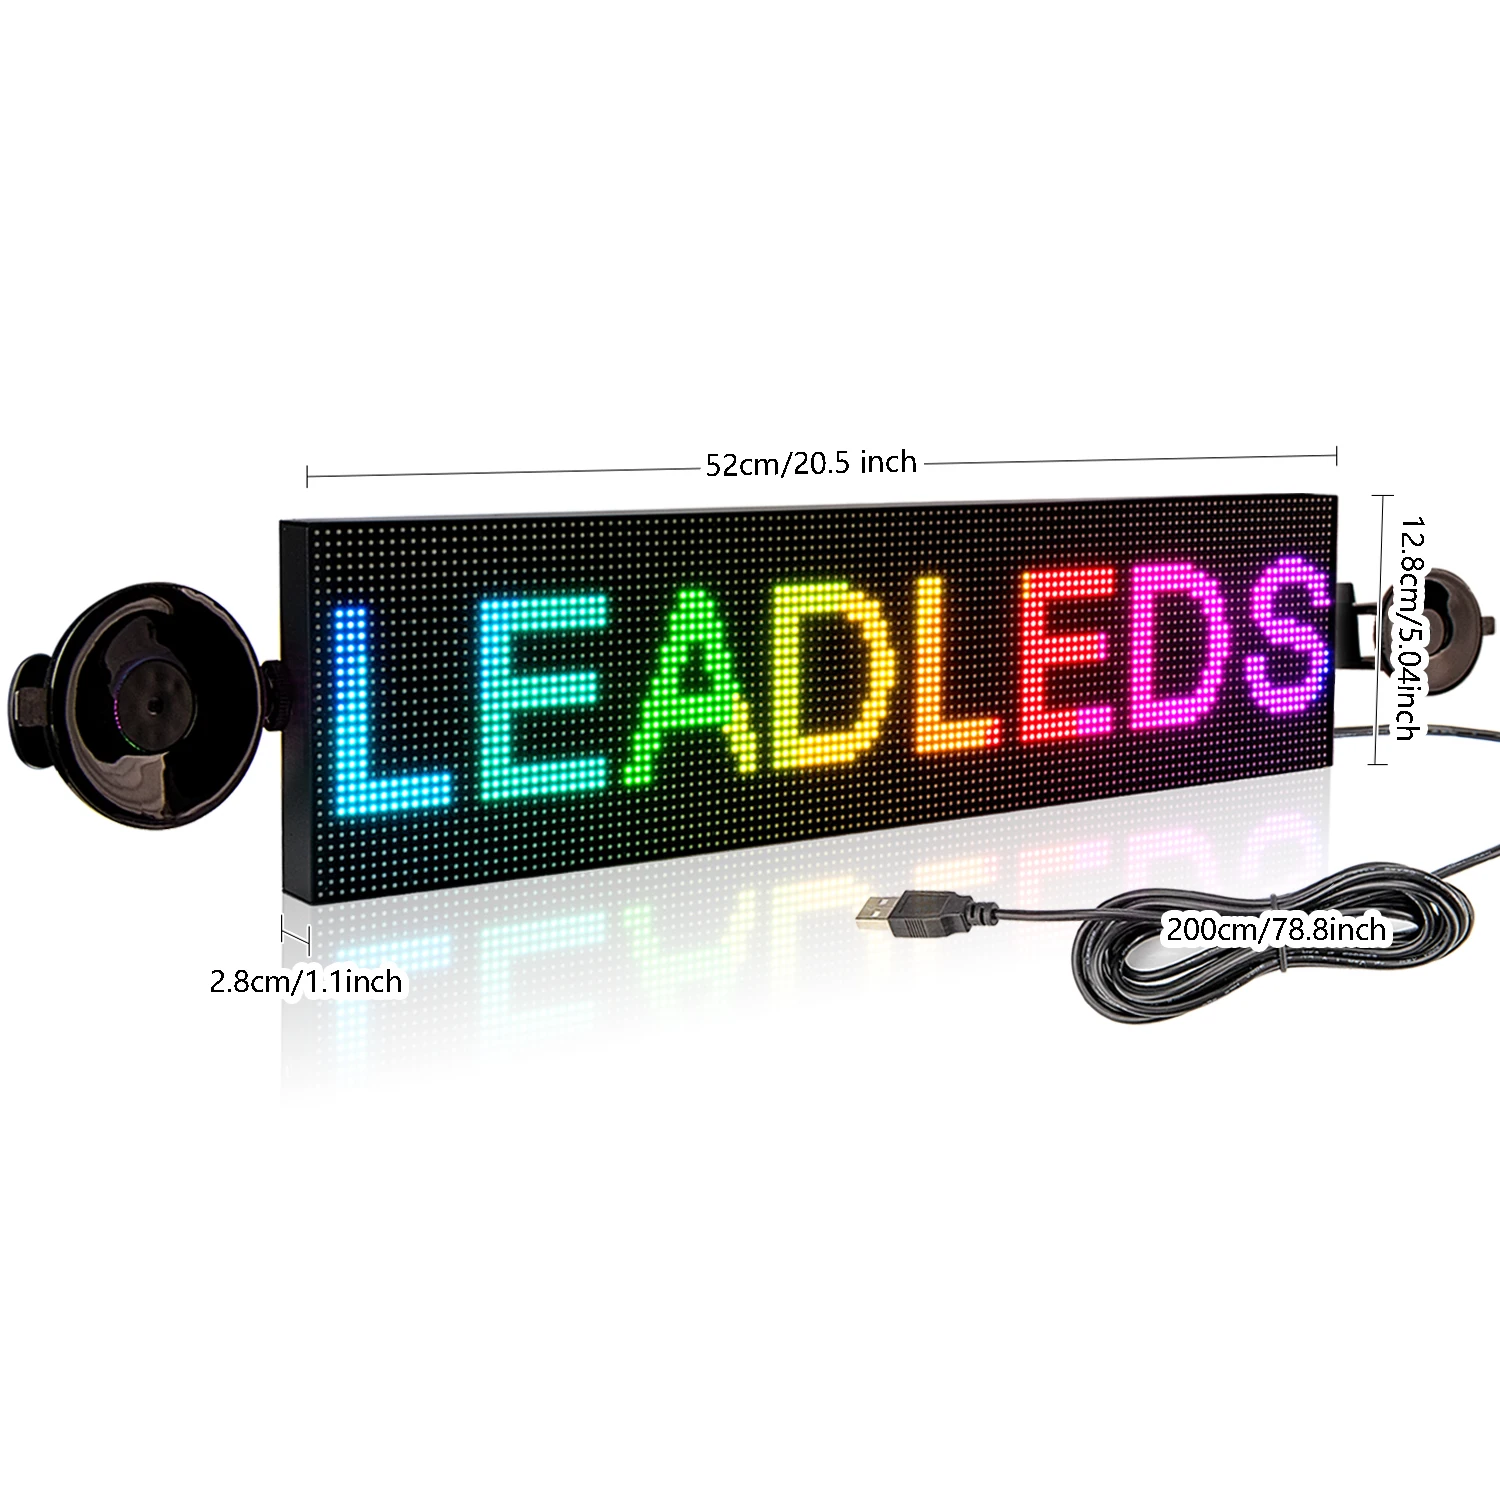 Leadleds P4 Full Color WiFi LED Sign Car Scrolling Message Board Billboard  Support Text, Time Indoor Use for Car, Taxi, Store AliExpress